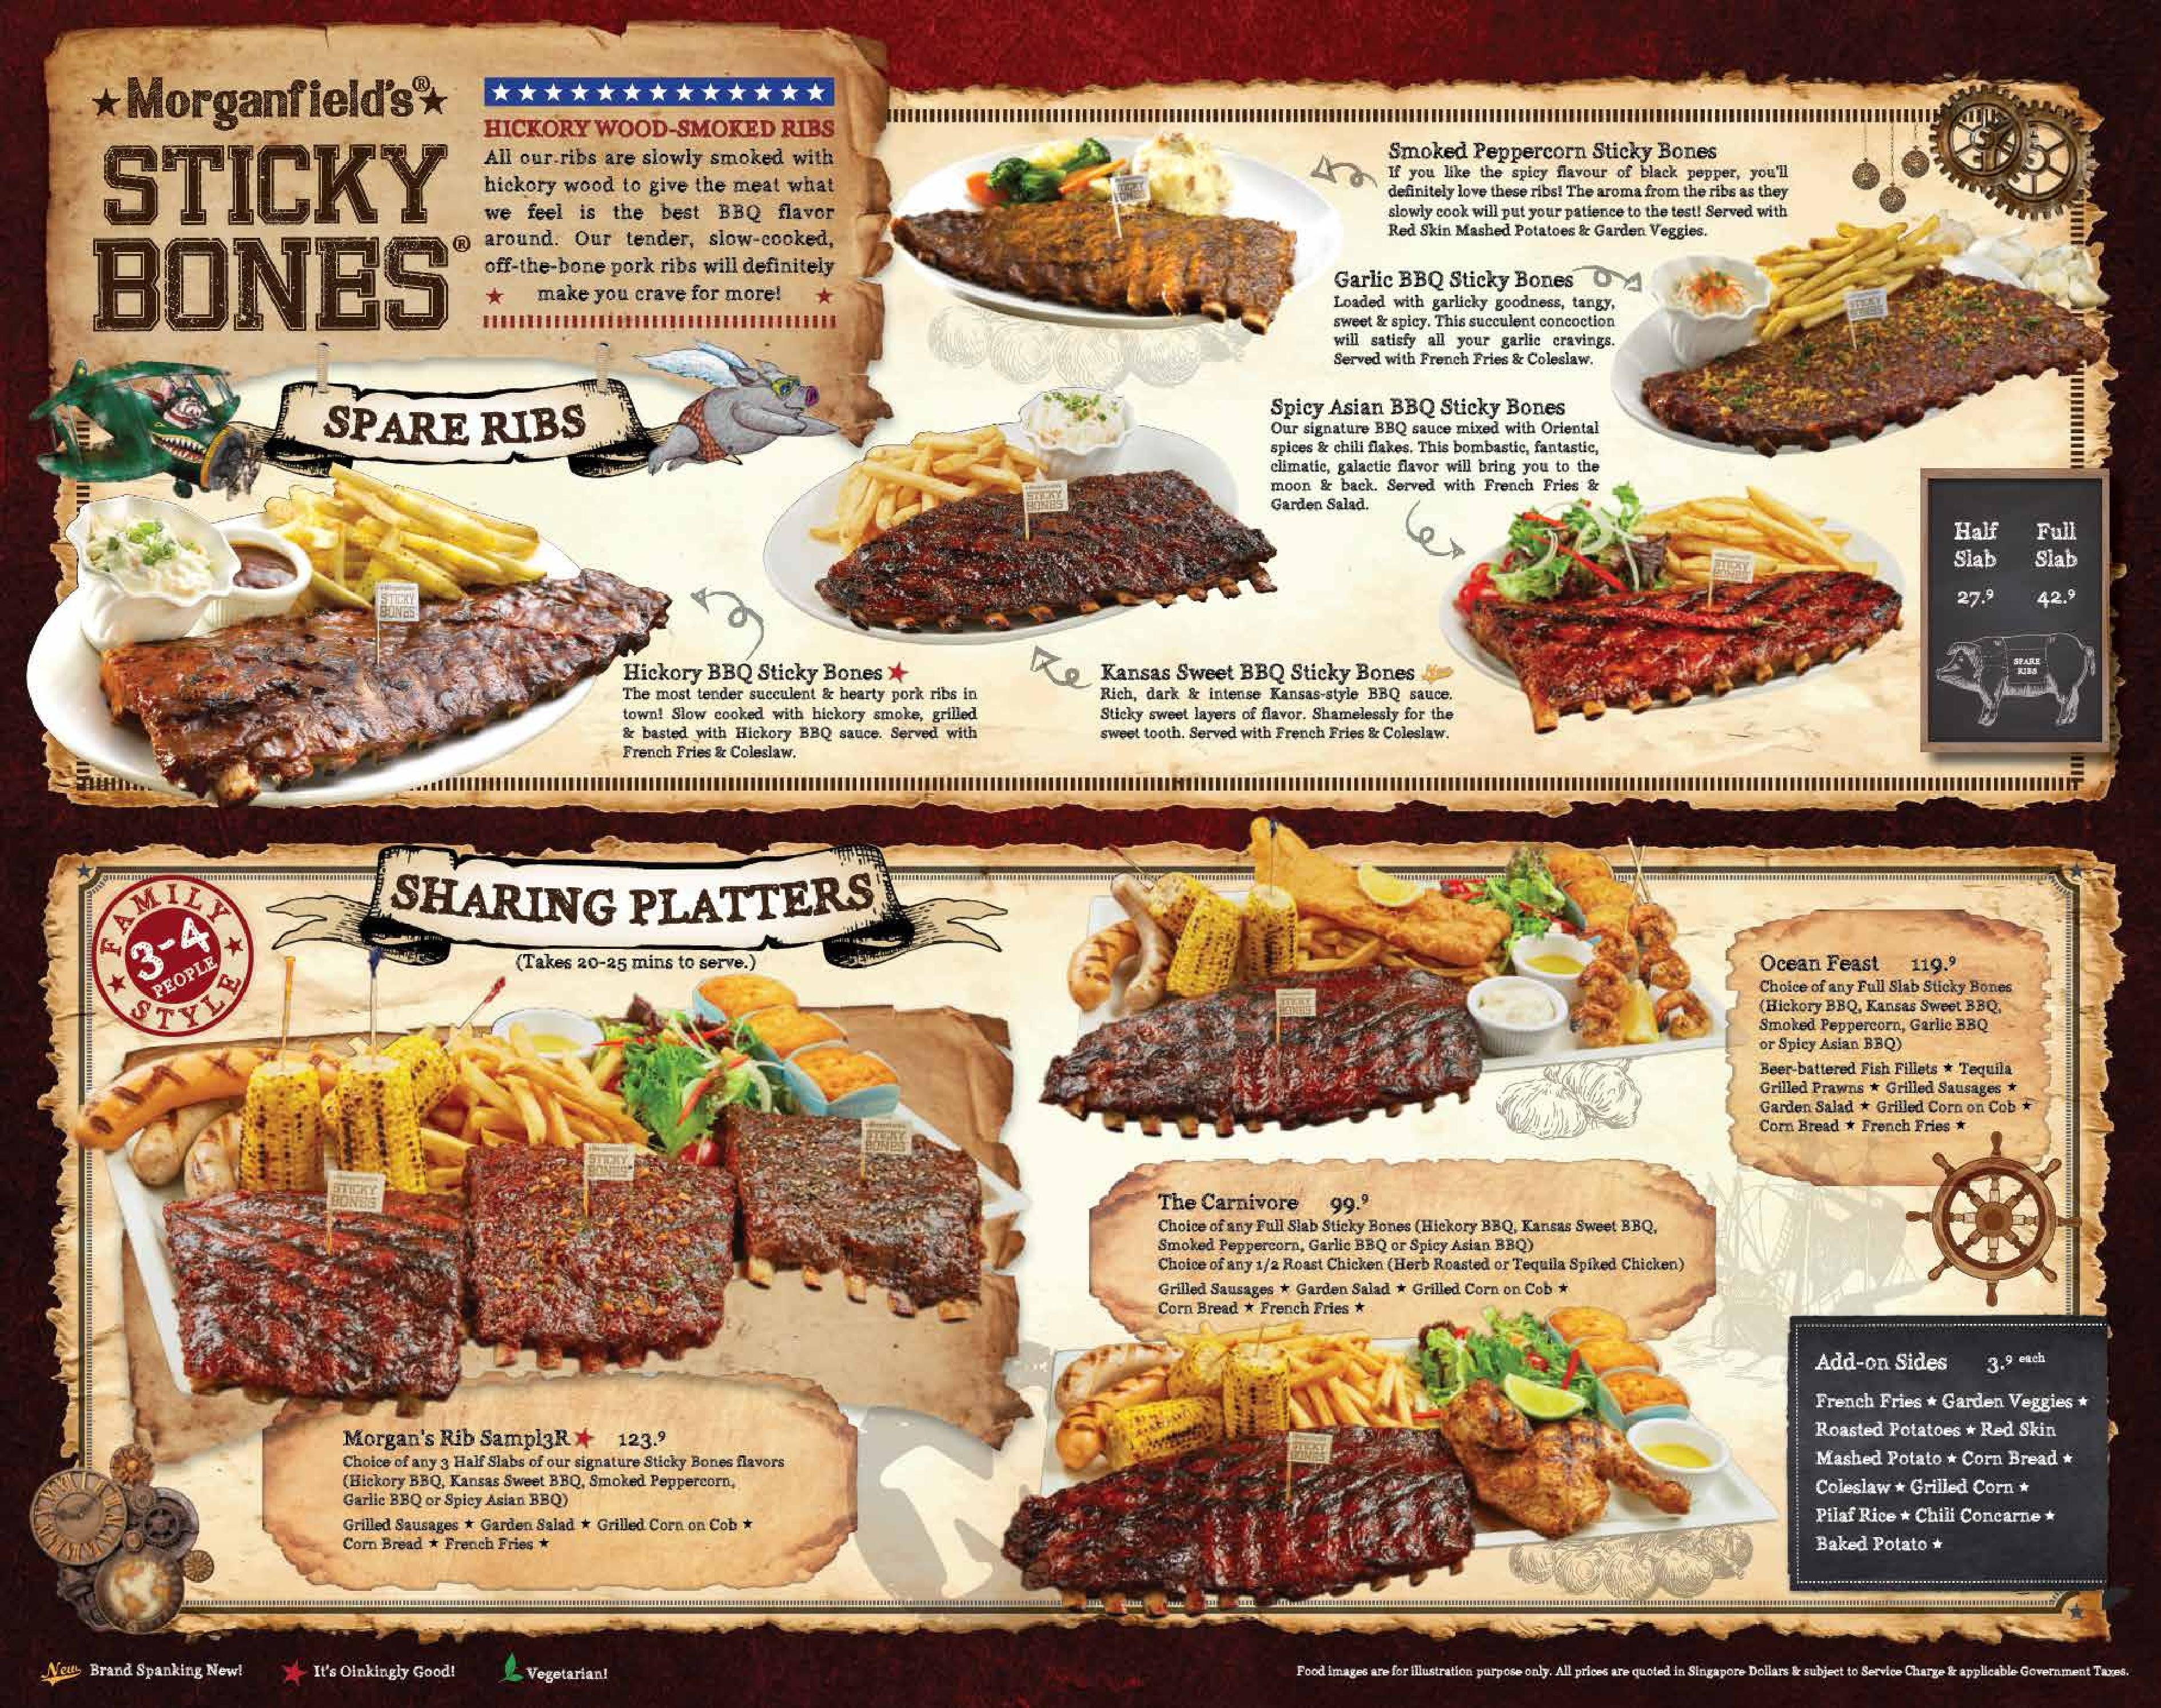 Morganfield’s is offering 1-for-1 Half Slab Sticky Bones to Singtel’s customers. Valid from now till 31 Mar 18. - 2